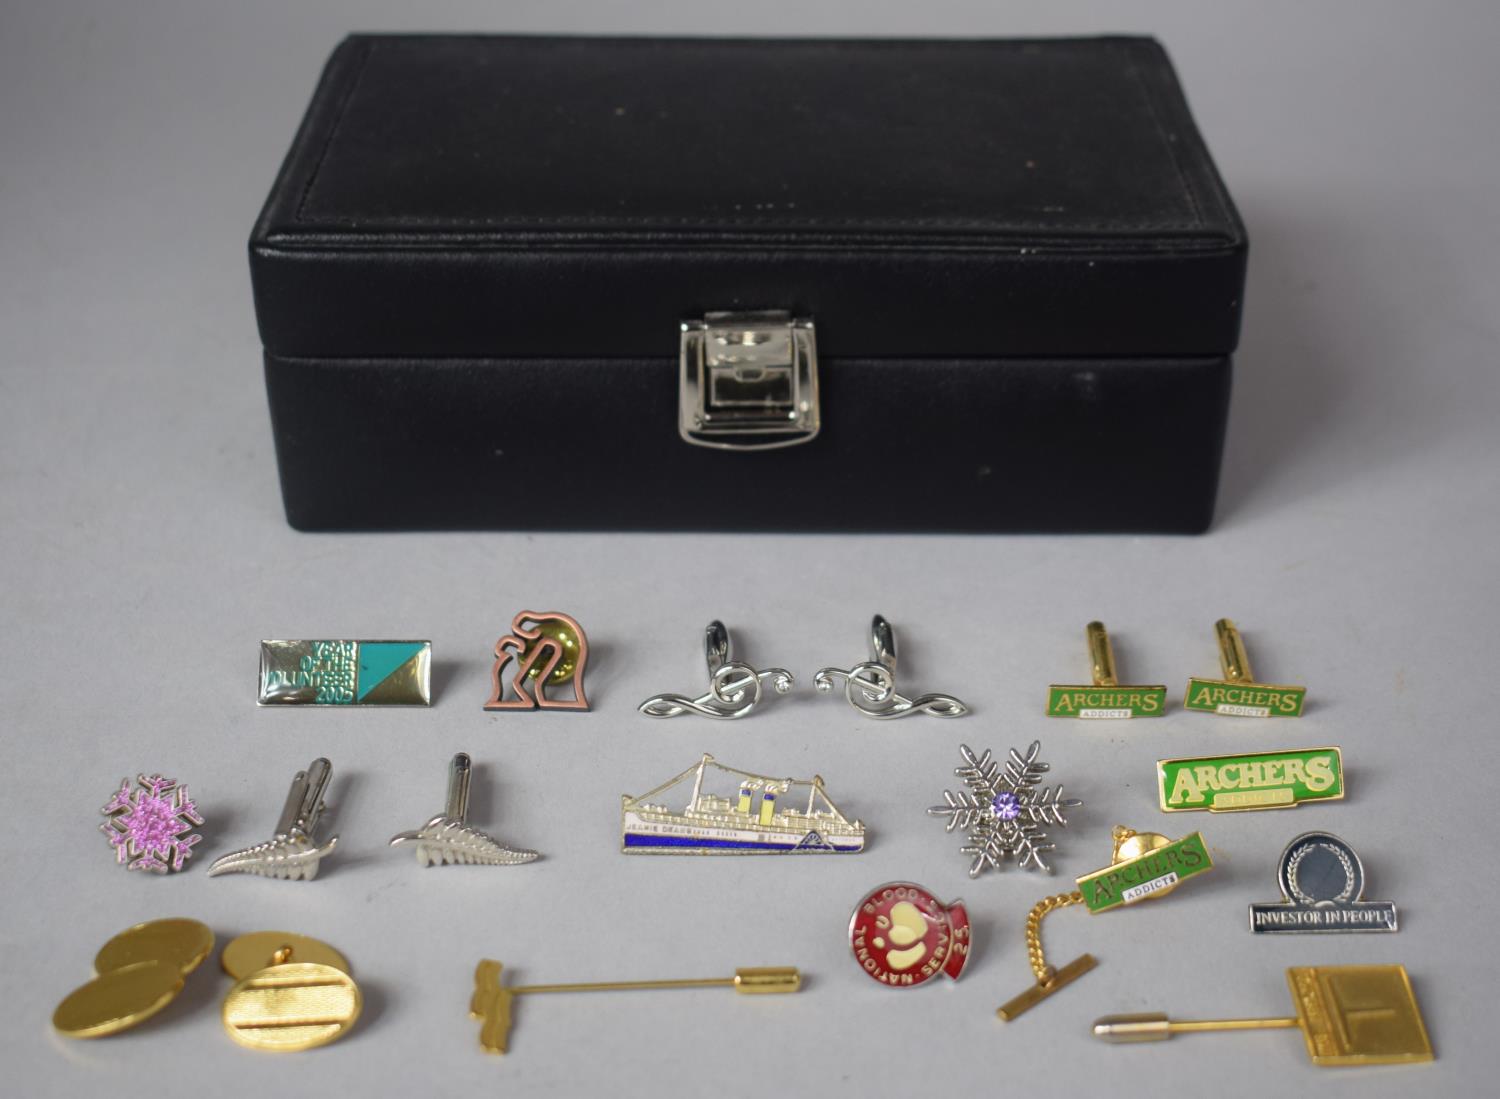 A Small Jewellery Box Containing Cufflinks, Enamelled Badges etc